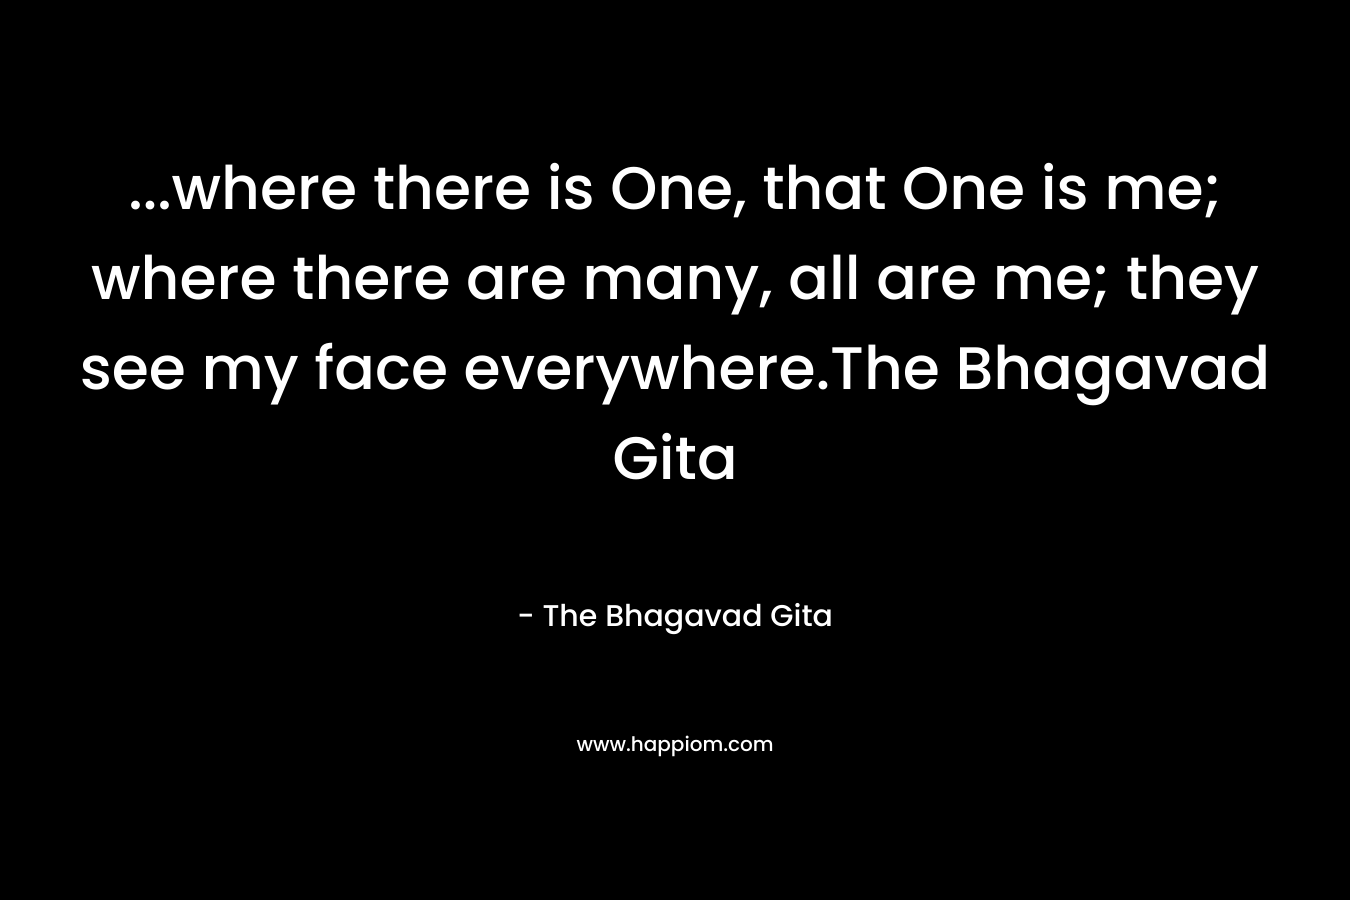 ...where there is One, that One is me; where there are many, all are me; they see my face everywhere.The Bhagavad Gita